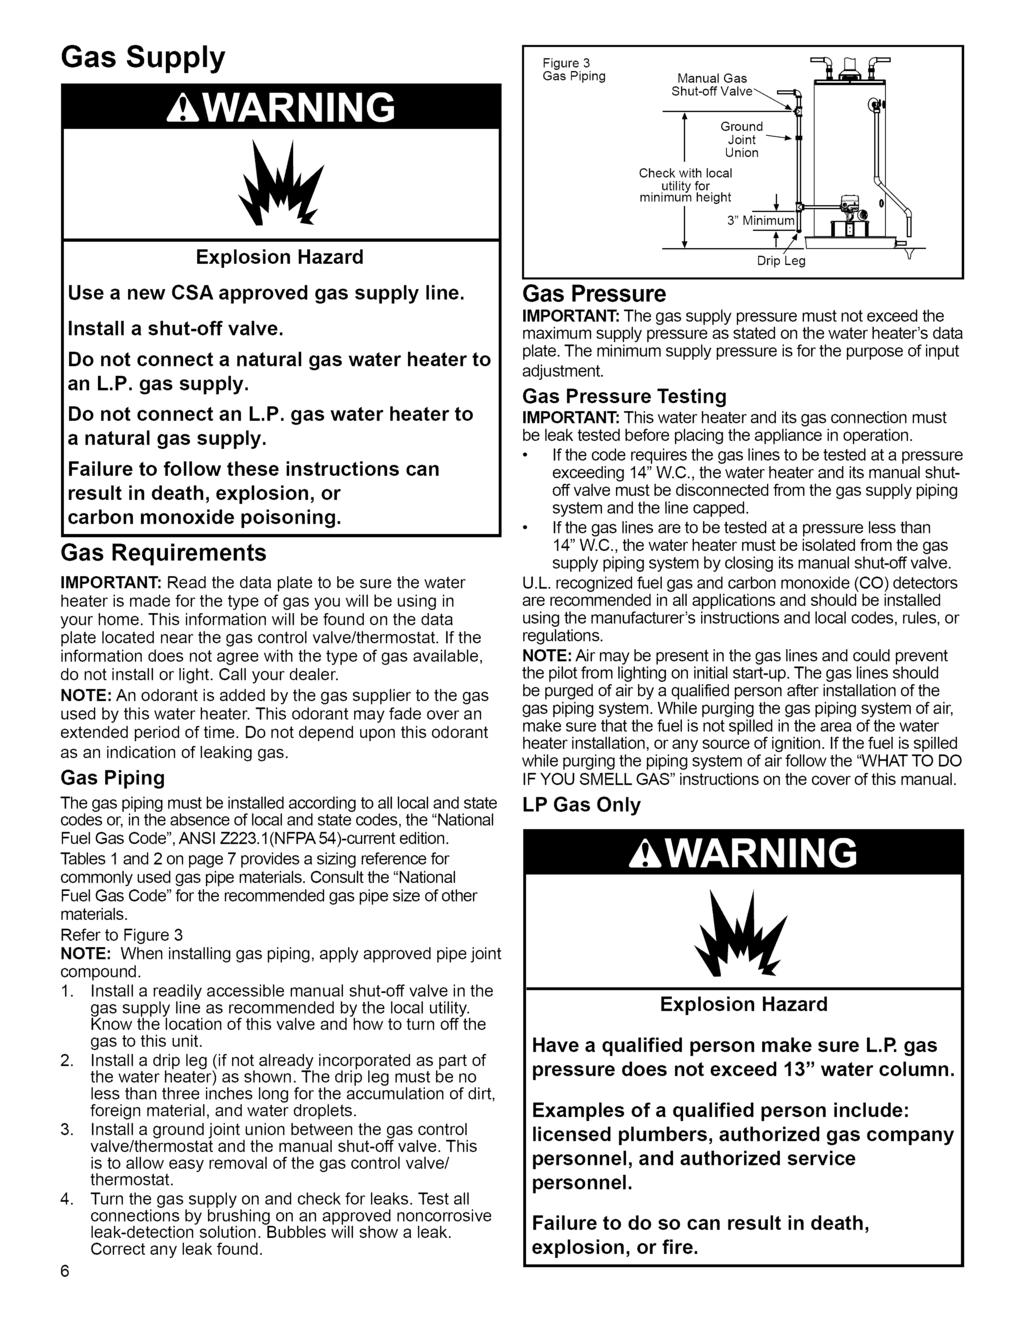 Gas Supply Figure 3 Gas Piping Manual Gas Shut-off Valve'---._ Check with local utility for Joint Ground Union Explosion Hazard Use a new CSA approved gas supply line. Install a shut-off valve.